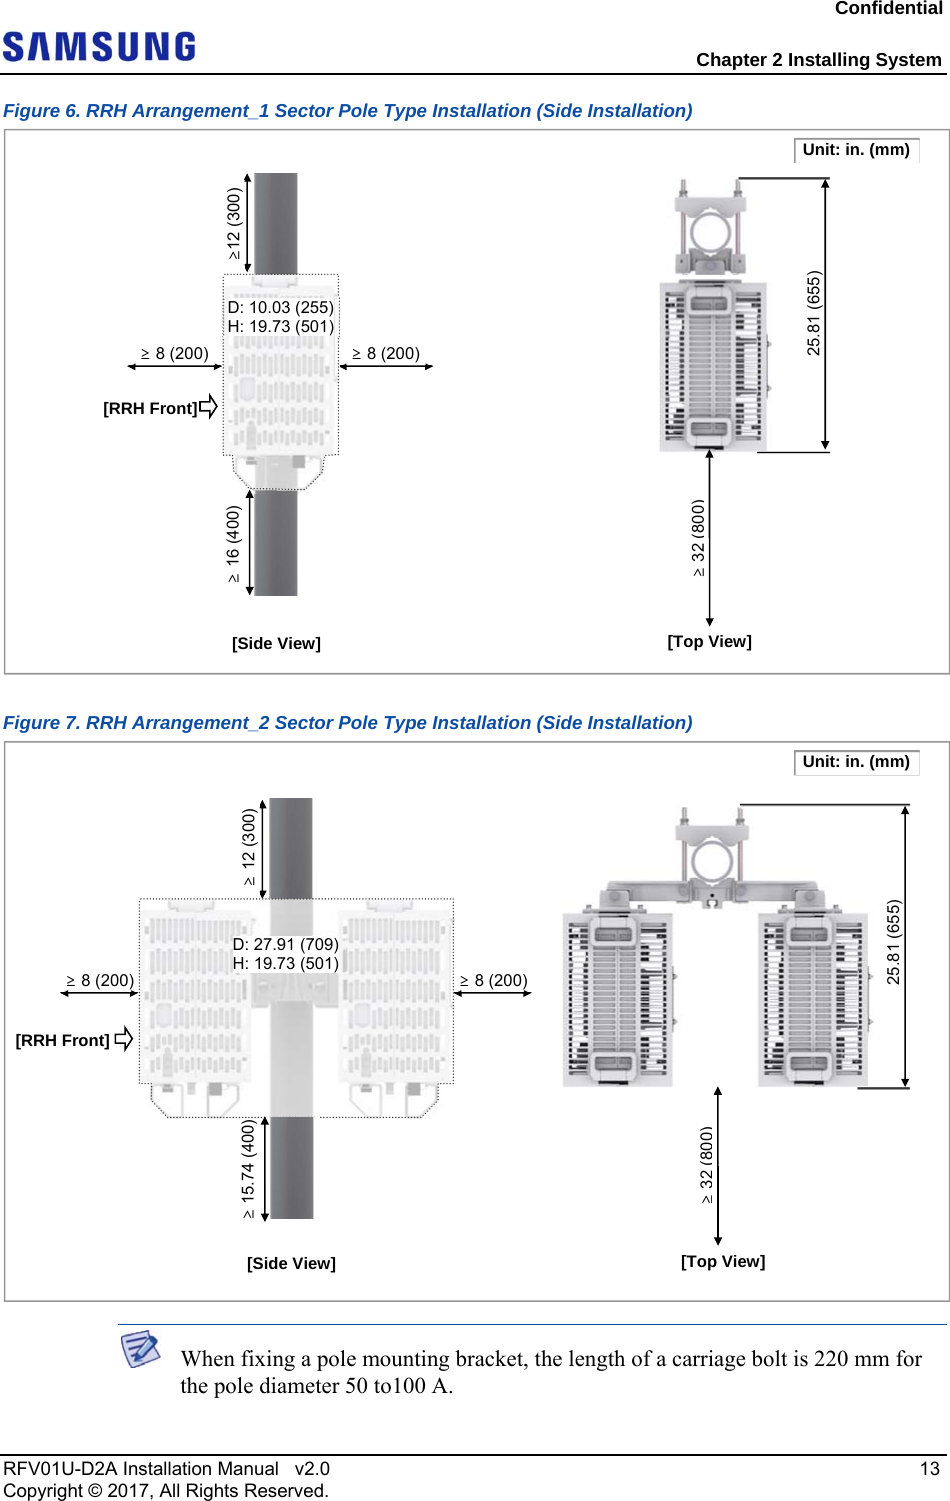 Confidential  Chapter 2 Installing System RFV01U-D2A Installation Manual   v2.0   13 Copyright © 2017, All Rights Reserved. Figure 6. RRH Arrangement_1 Sector Pole Type Installation (Side Installation)  Figure 7. RRH Arrangement_2 Sector Pole Type Installation (Side Installation)   When fixing a pole mounting bracket, the length of a carriage bolt is 220 mm for the pole diameter 50 to100 A. Unit: in. (mm)[Side View]  [Top View] ≥ 8 (200)≥ 8 (200) 25.81 (655) D: 10.03 (255) H: 19.73 (501) ≥12 (300) ≥ 16 (400) ≥32 (800)[RRH Front]Unit: in. (mm)[RRH Front] [Side View]  [Top View] ≥ 8 (200) 25.81 (655) ≥ 12 (300) ≥ 15.74 (400) ≥32 (800)D: 27.91 (709) H: 19.73 (501) ≥ 8 (200)